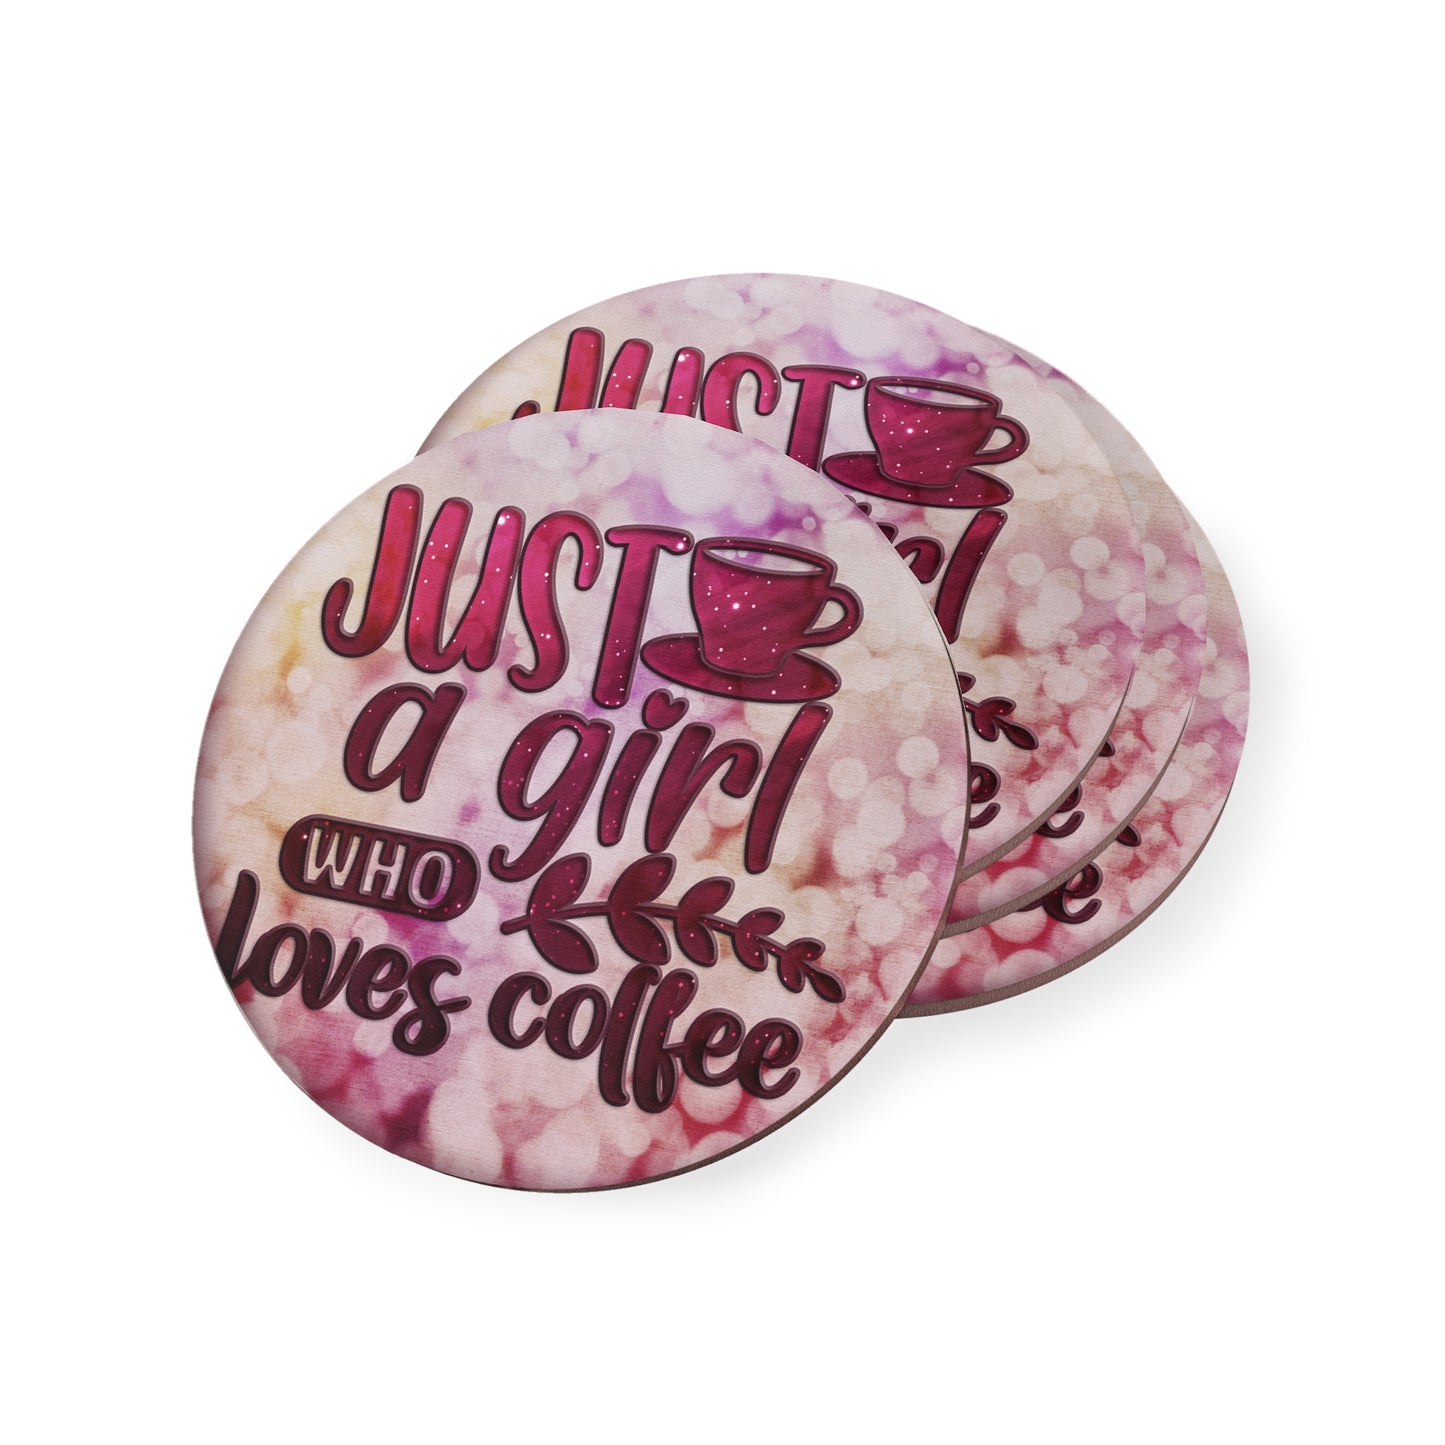 " Just A Girl Who Loves Coffee " Round Coasters